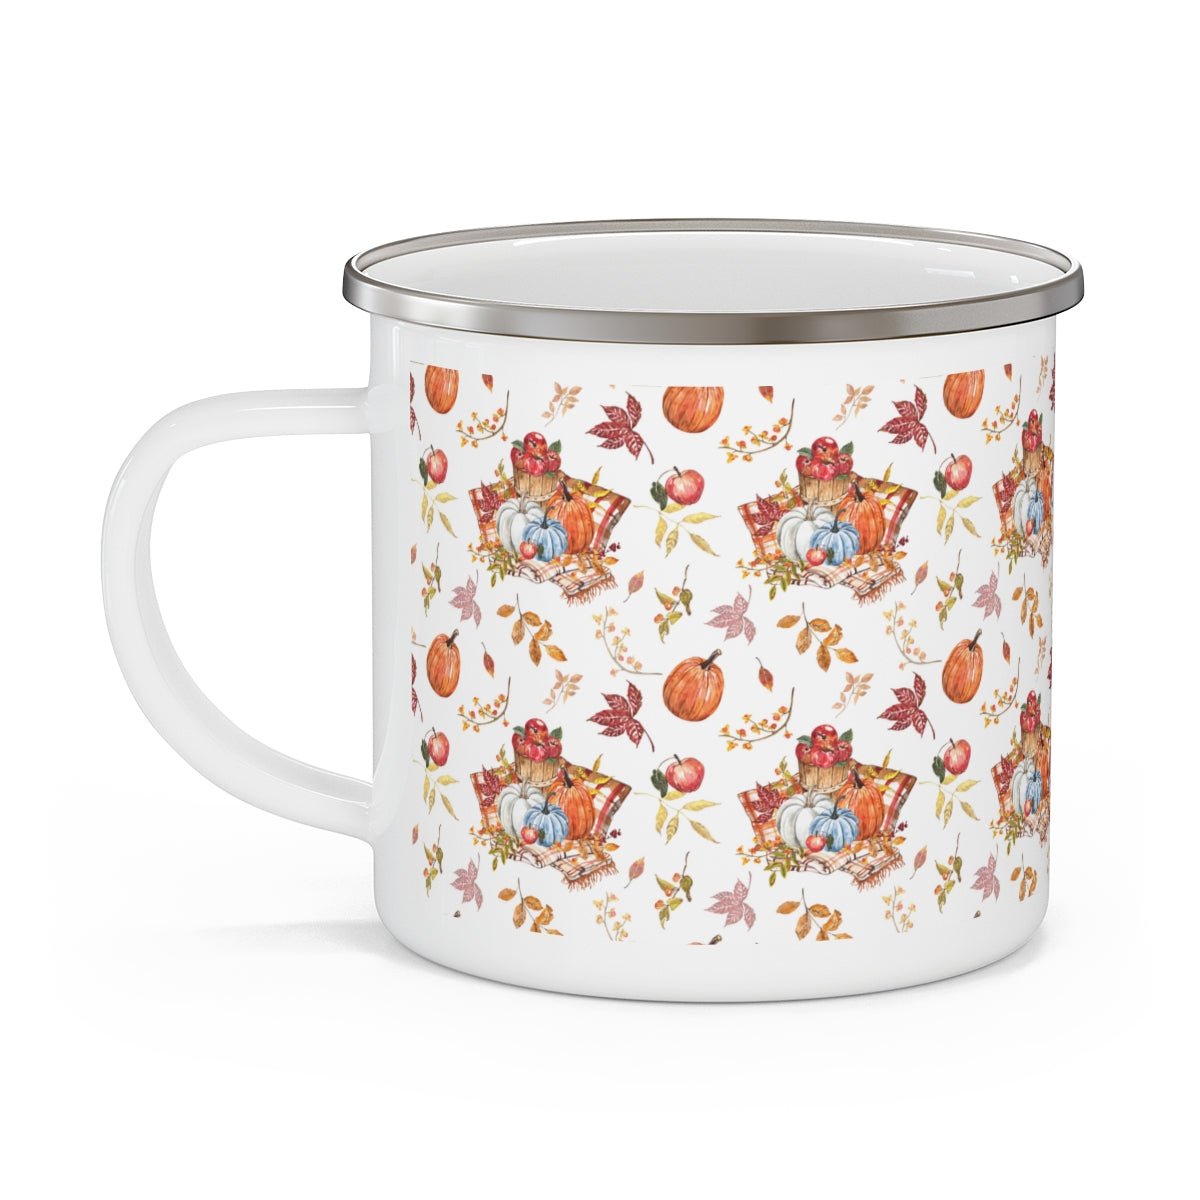 Fall Pumpkins and Apples Stainless Steel Camping Mug - Puffin Lime